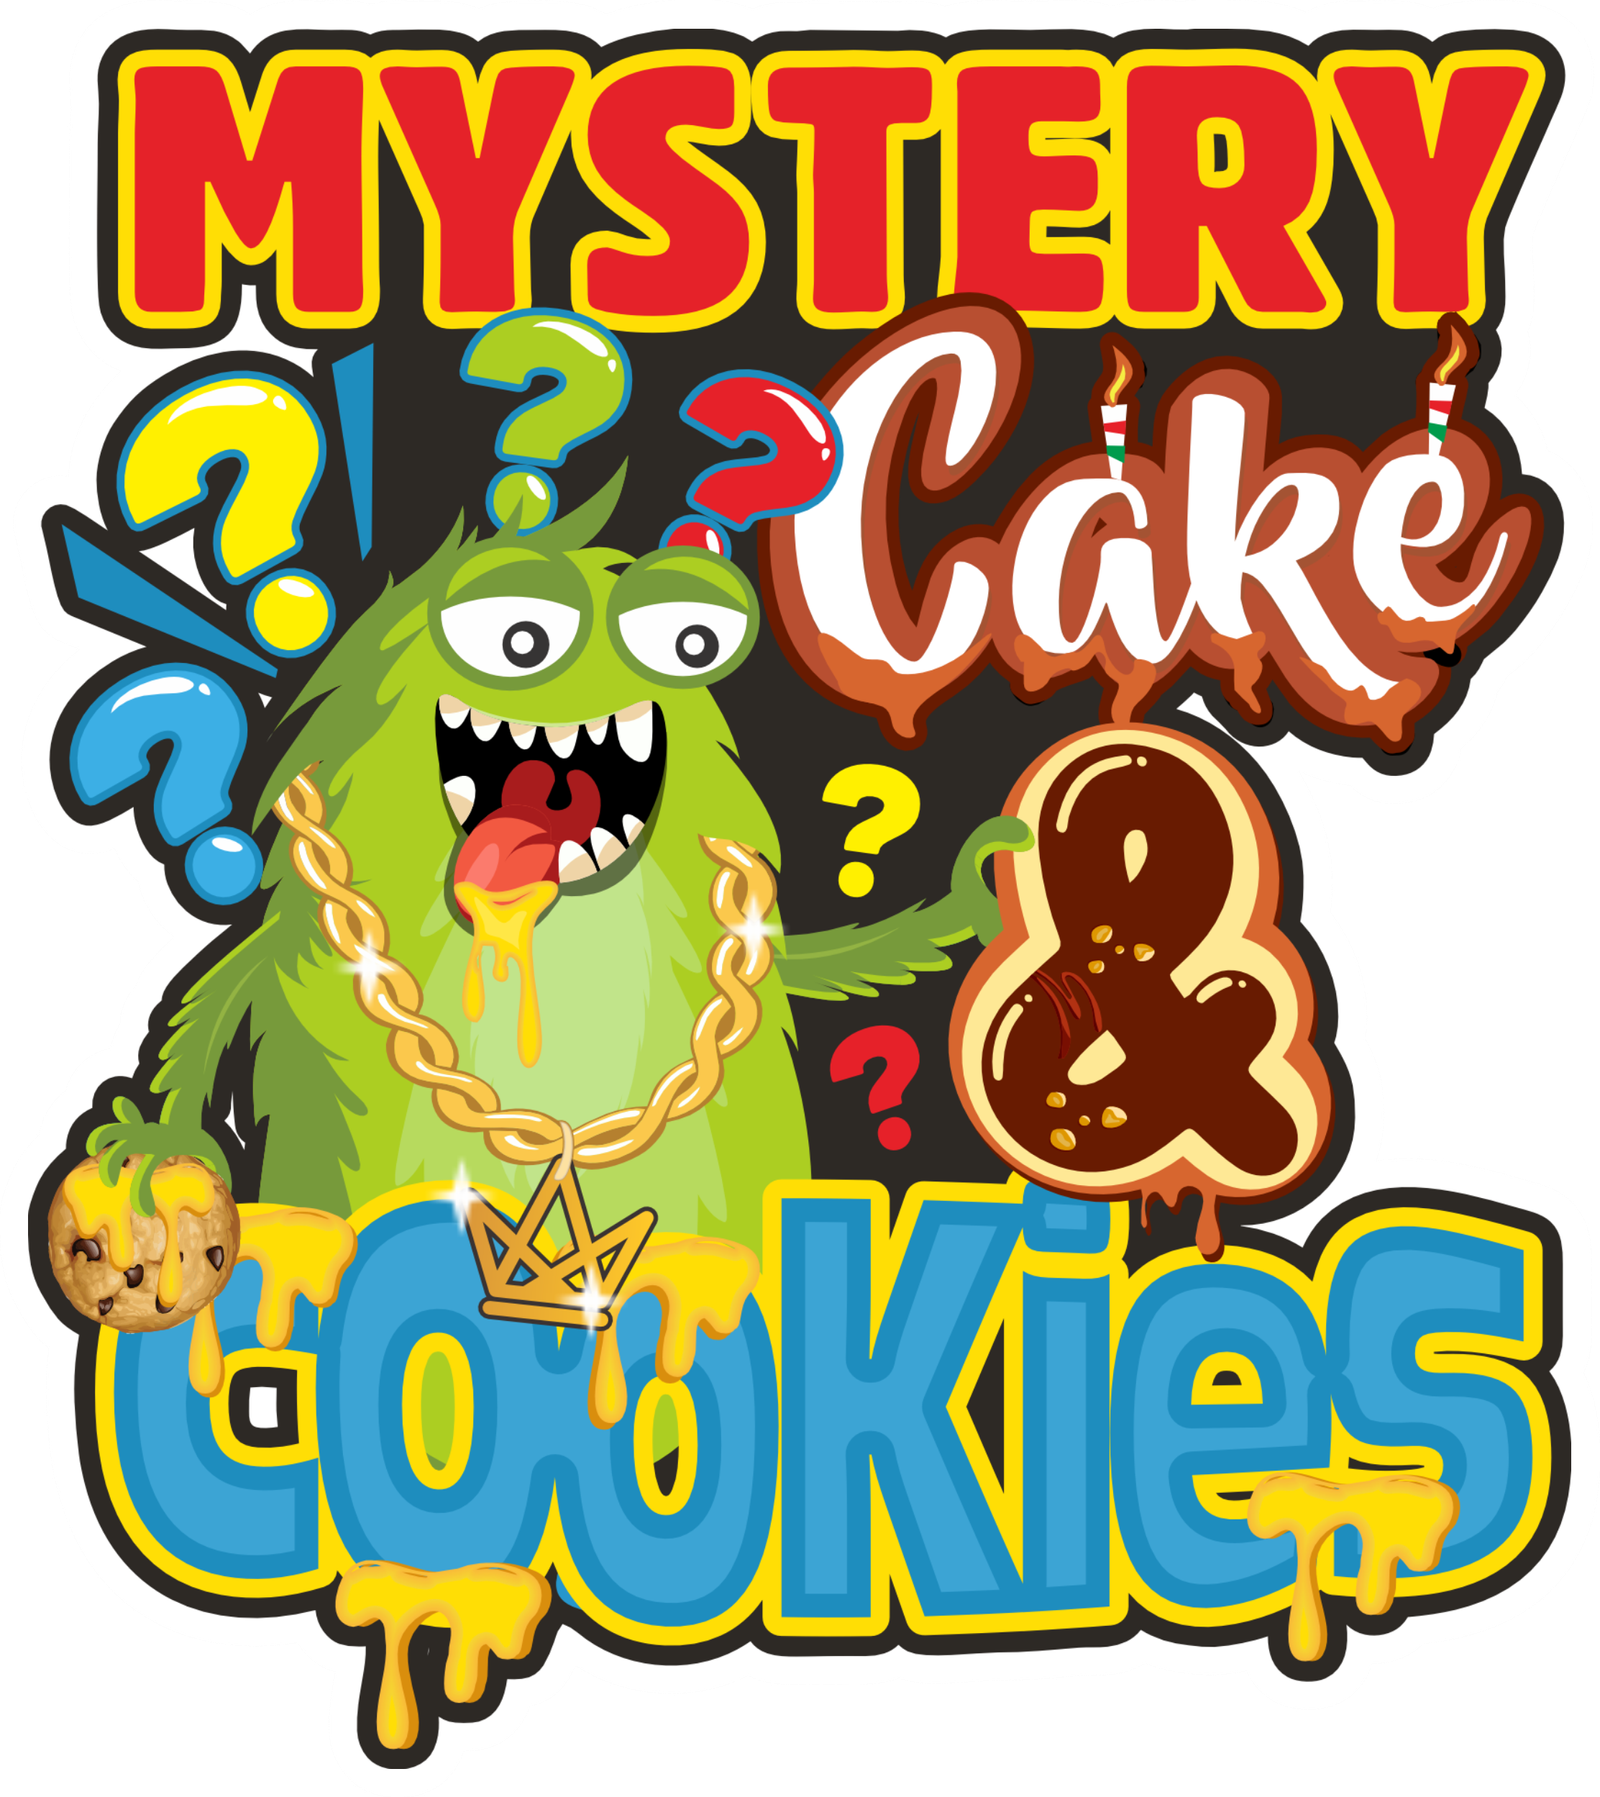 MYSTERY-CAKE-COOKIES.png